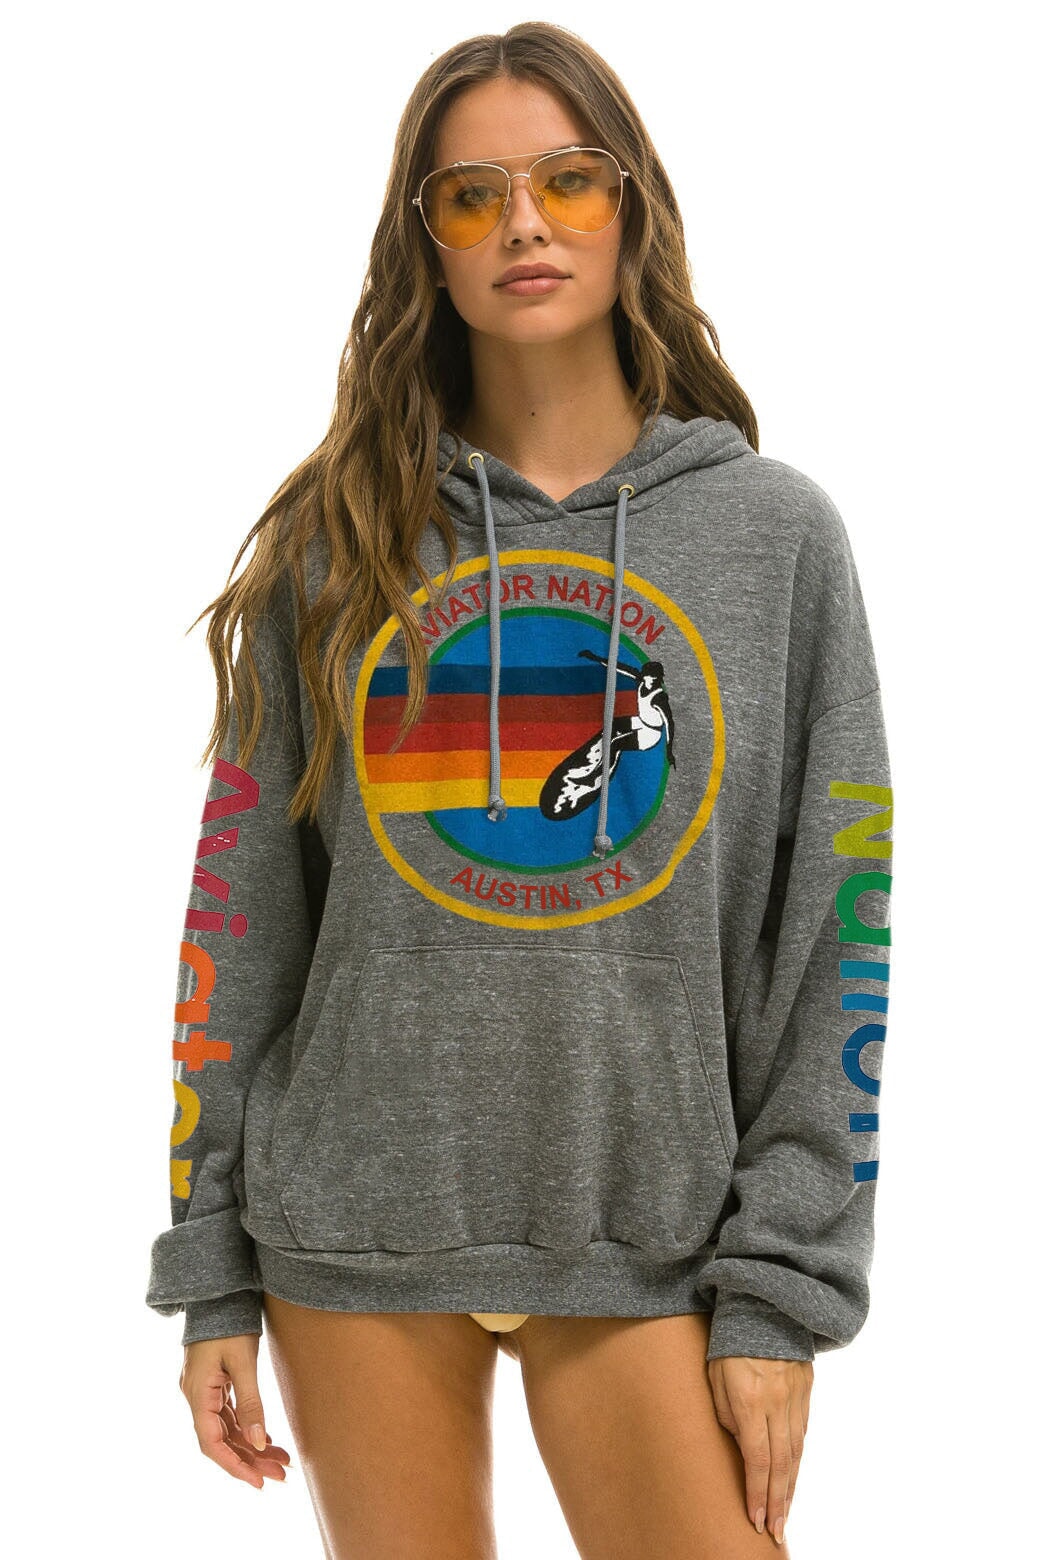 AVIATOR NATION AUSTIN RELAXED PULLOVER HOODIE - HEATHER GREY Hoodie Aviator Nation 